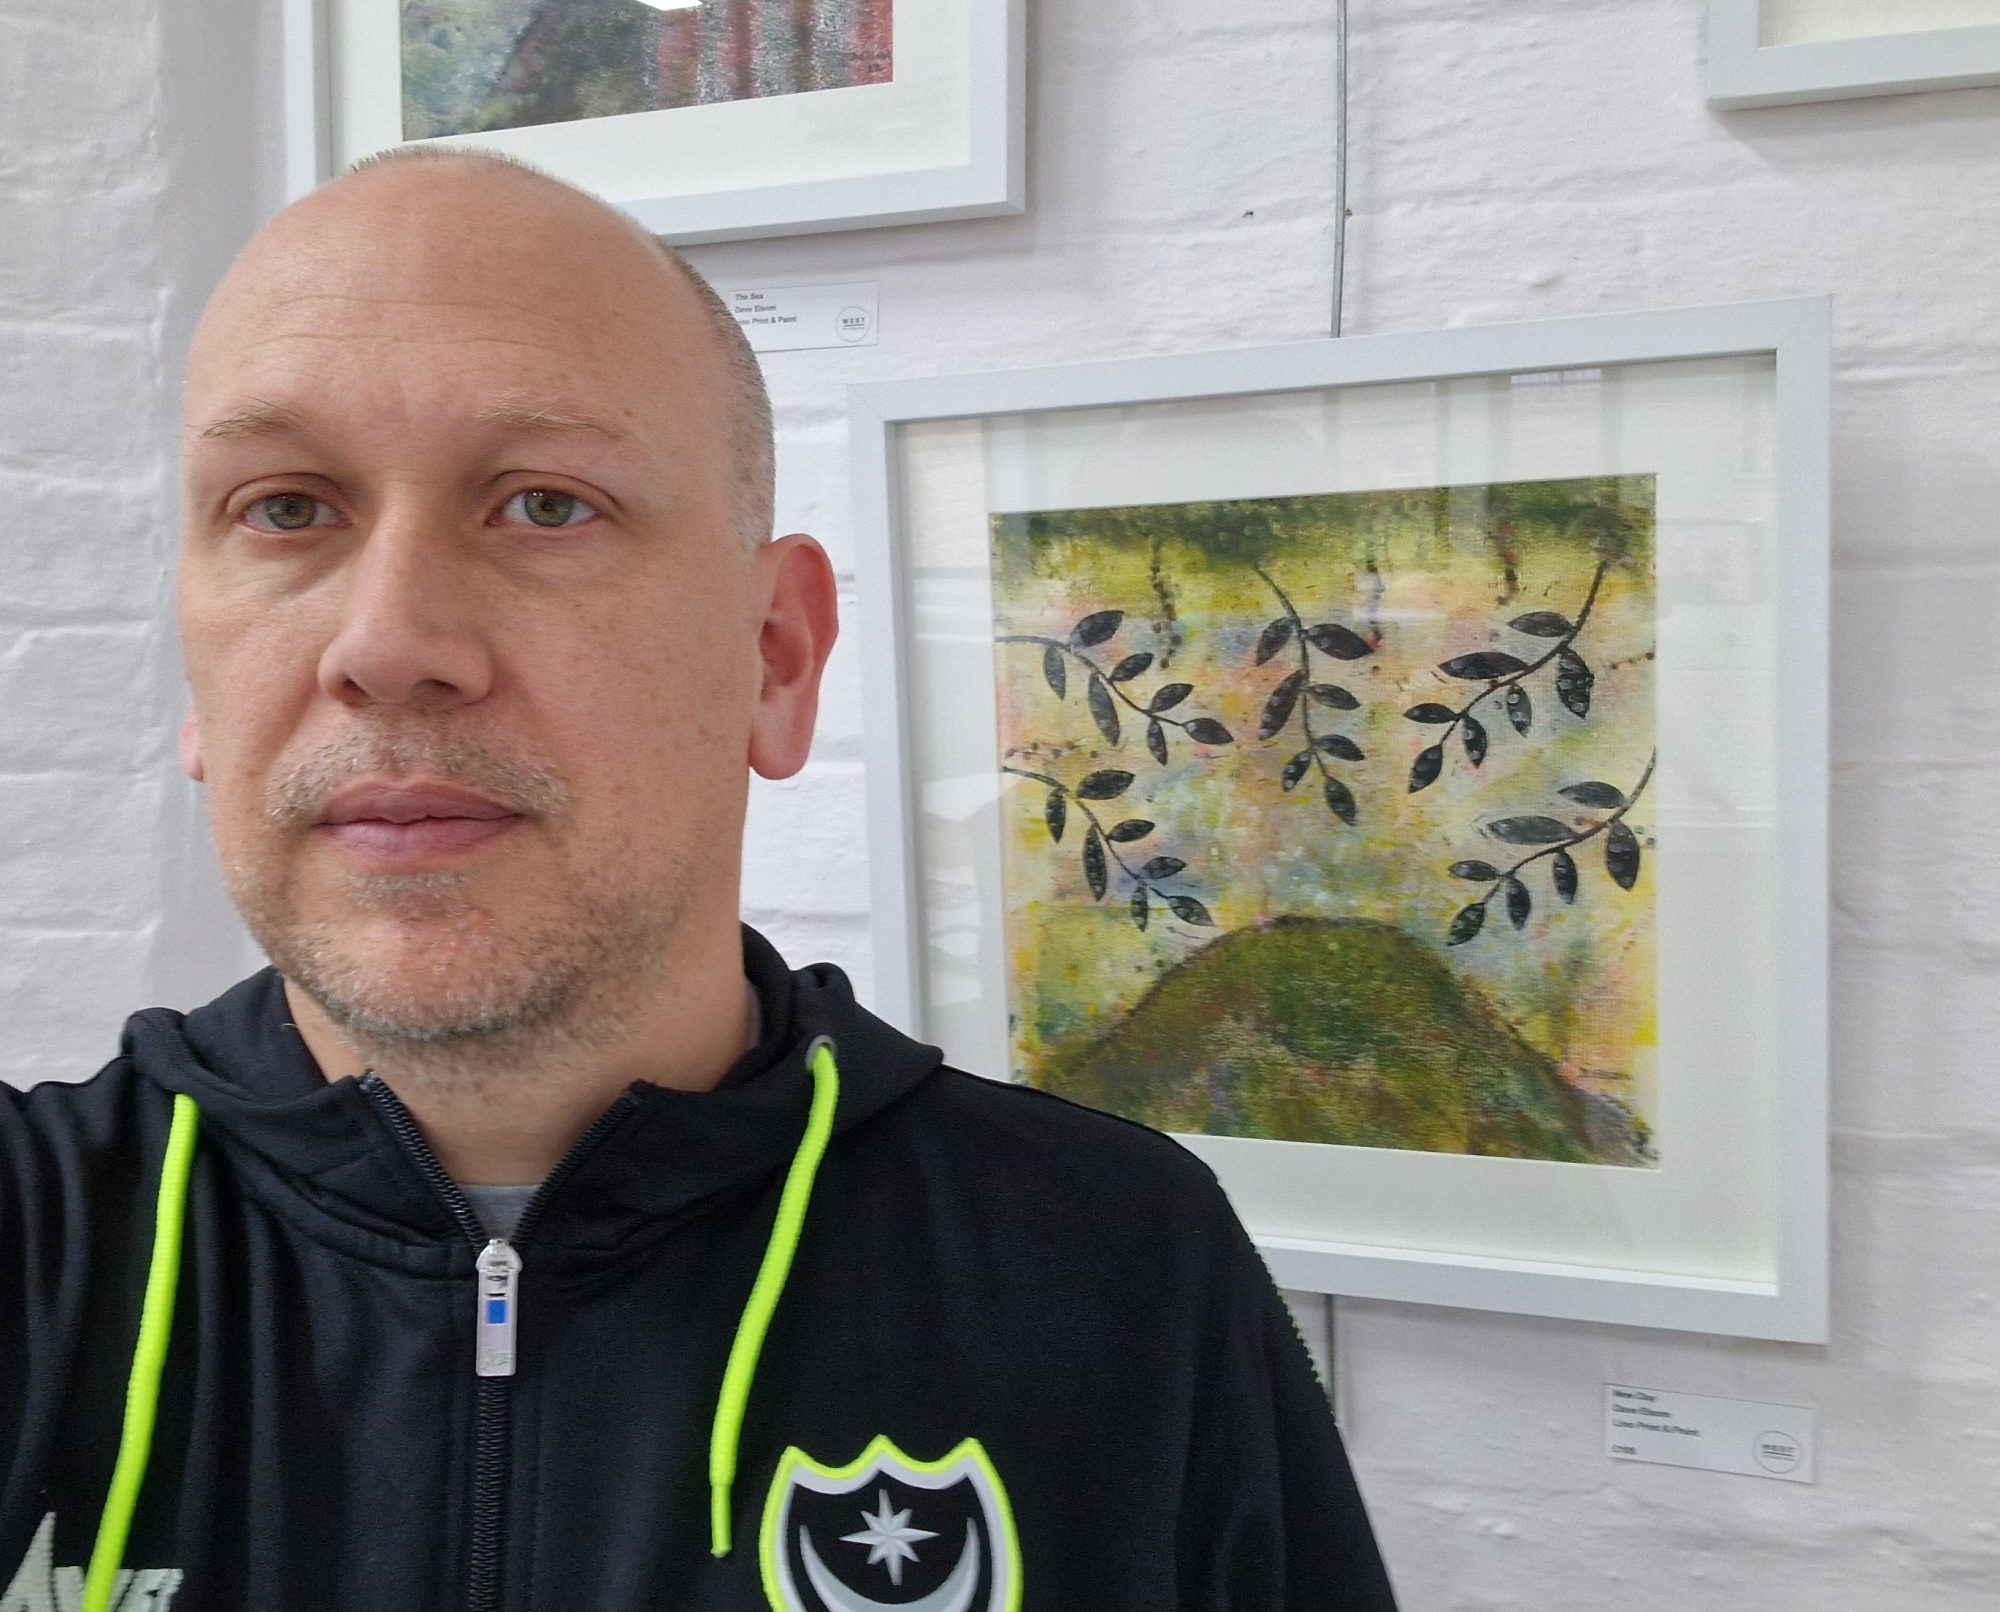 Linoprint artist Dave Elsom in front of one of his linoprints